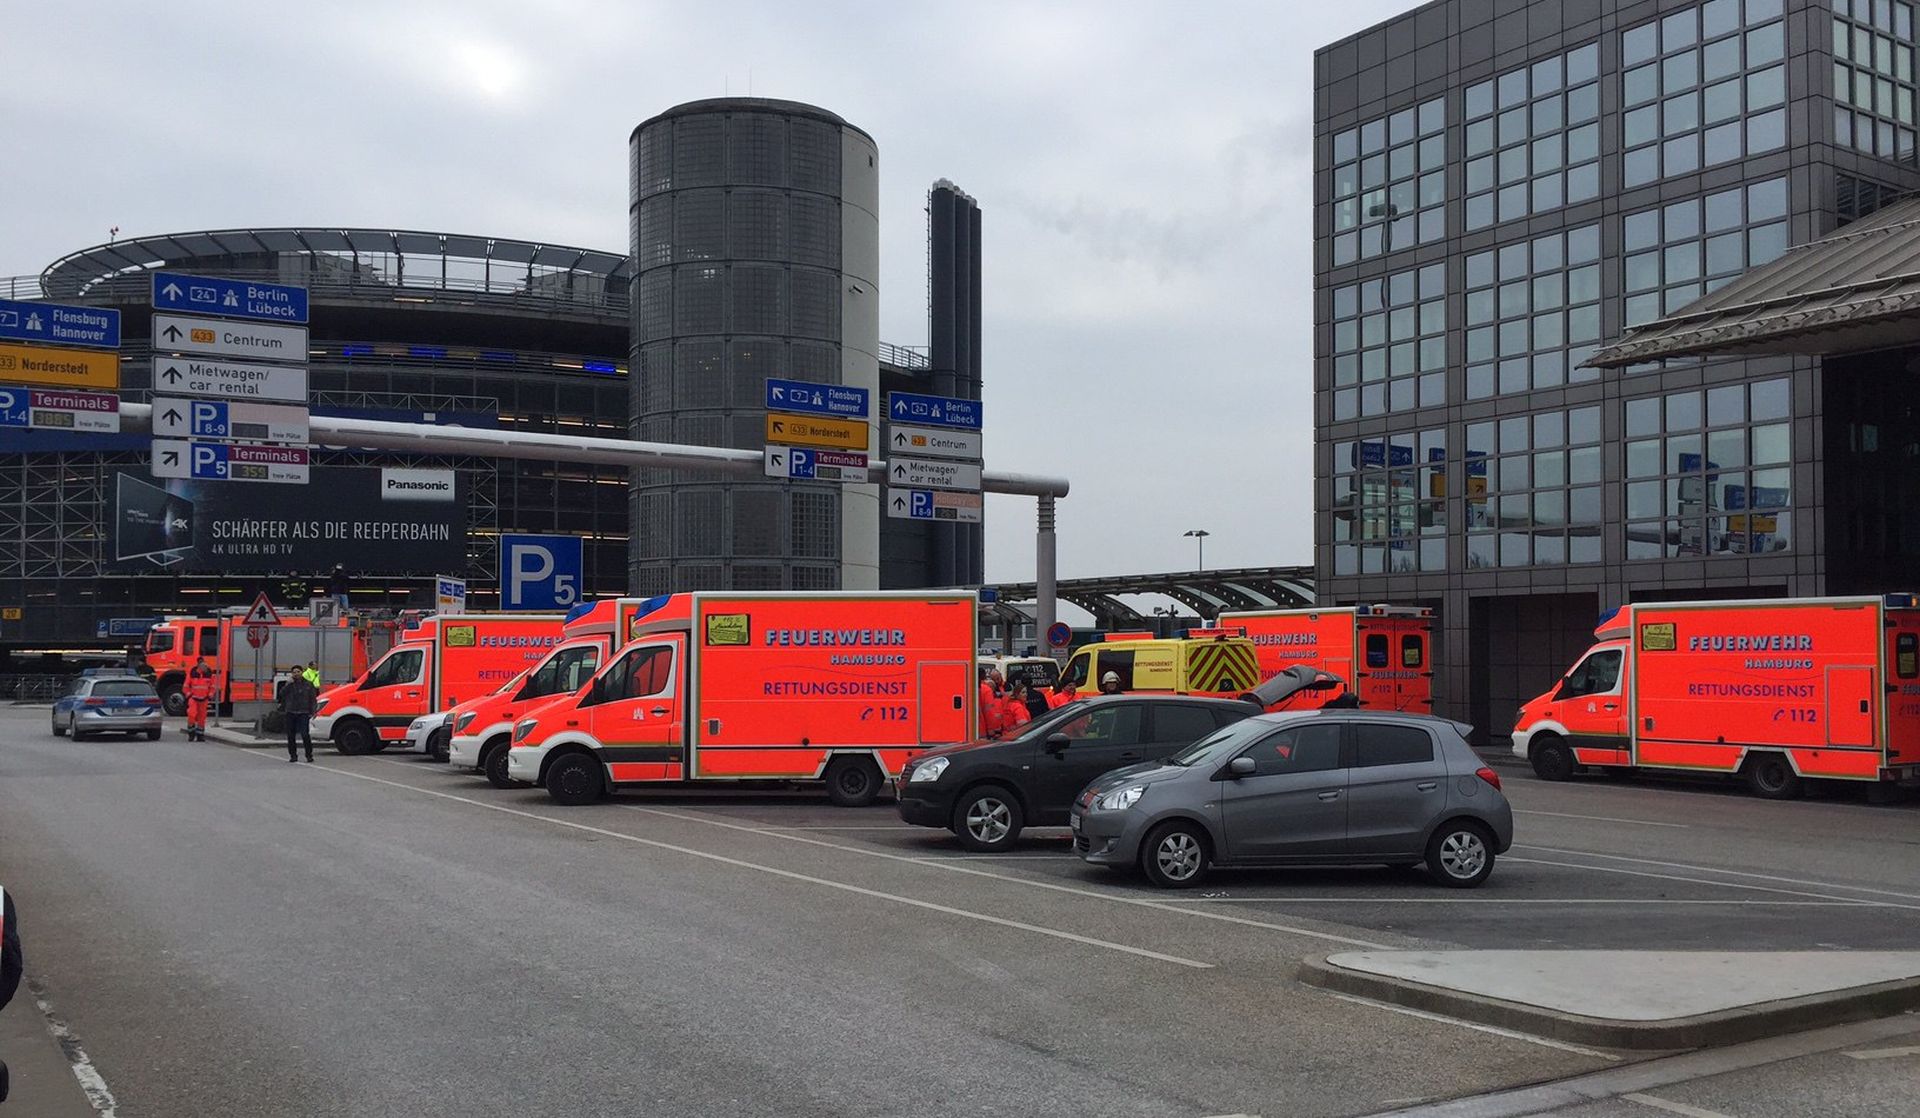 epa05787635 Ambulance and firefighter cars are parked in front of the airport of Hamburg, Germany 17 February 2017. The Hamburg airport has been temporarily evacuated after people reported suffering from breathing difficulties following an apparent gas leak.  EPA/LARS EBNER